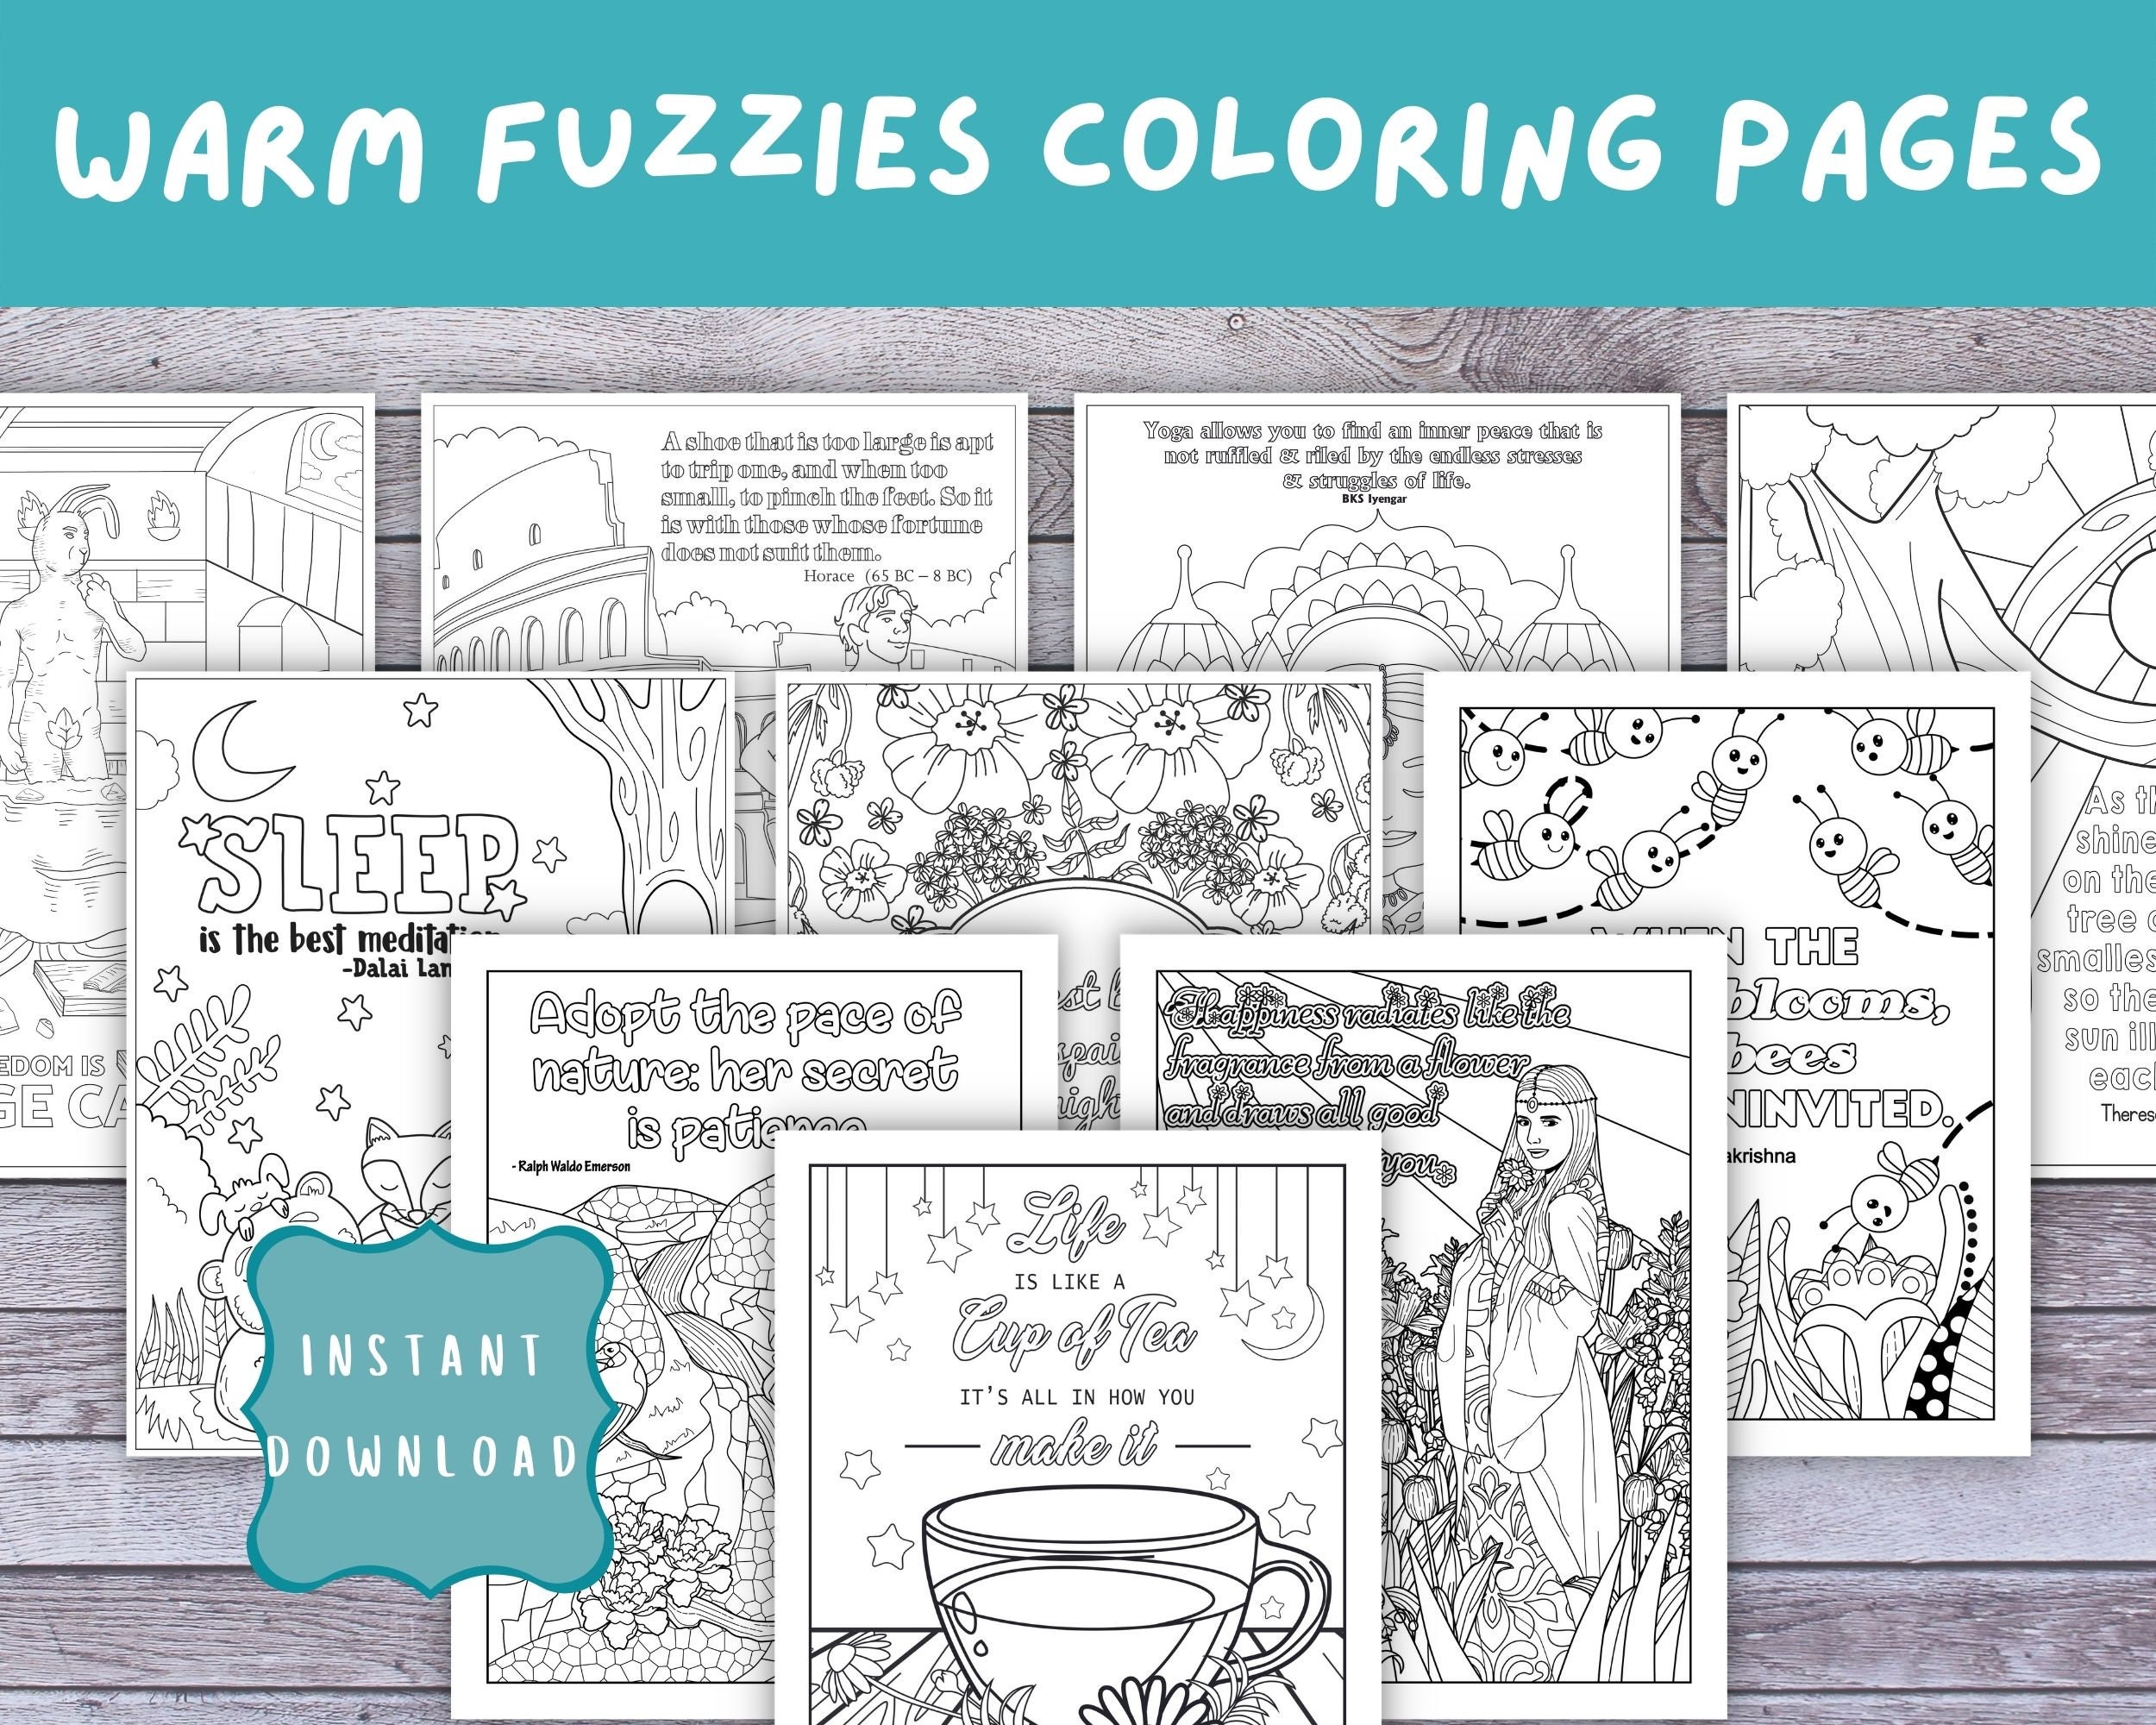 Fantasy Fuzzy Coloring Posters